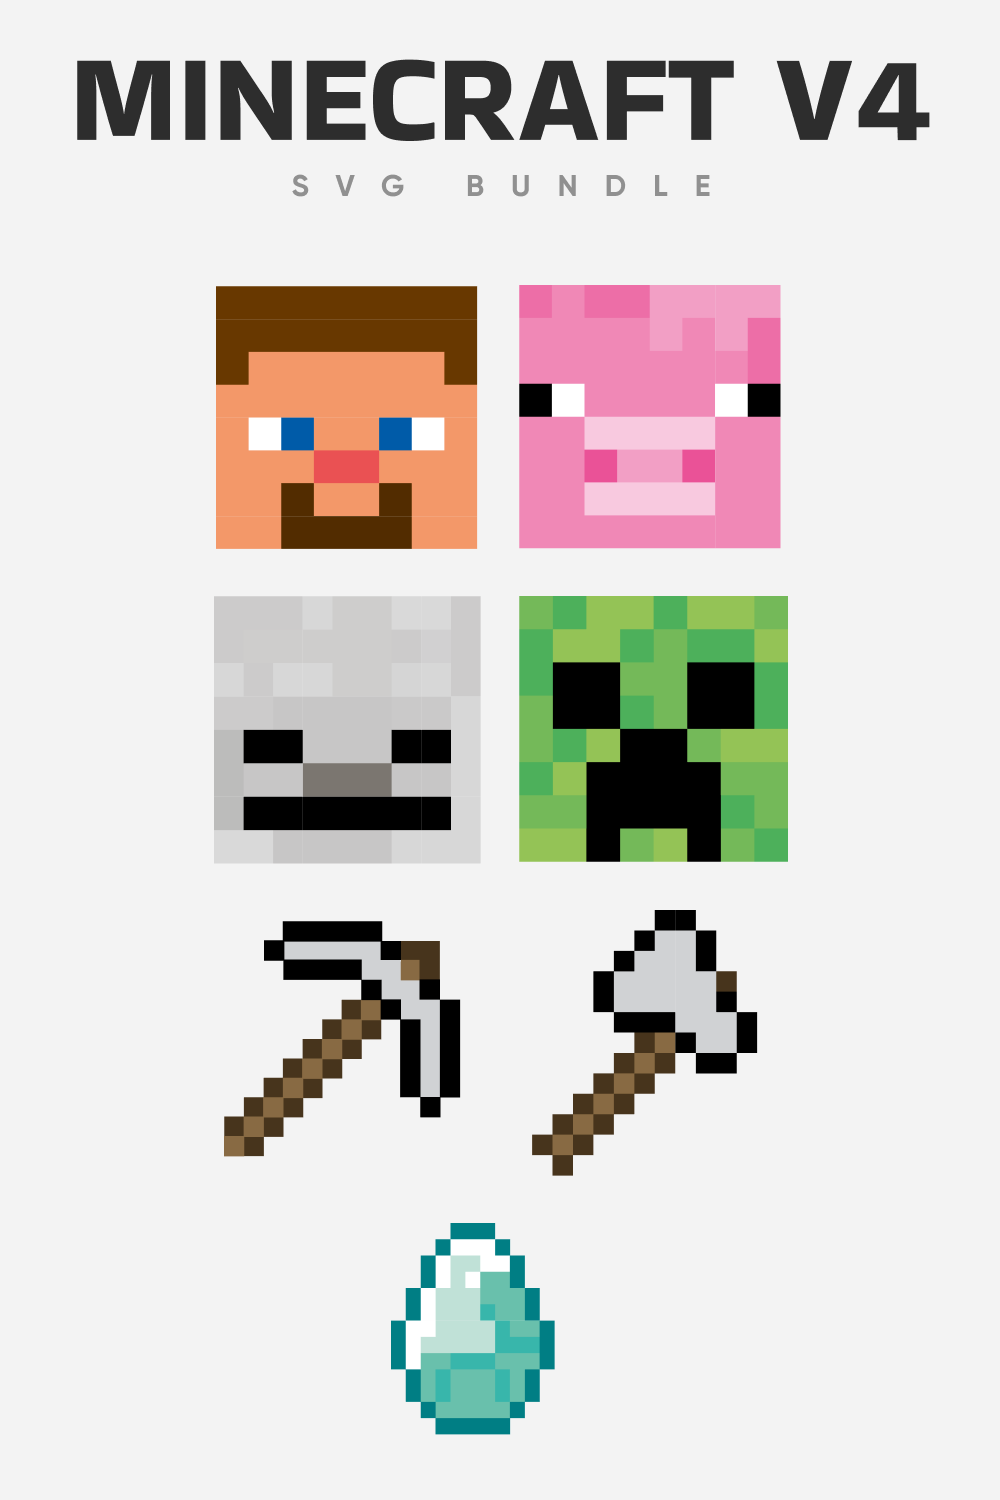 Heads of creatures from the game of minecraft Minecraft Creeper SVG.